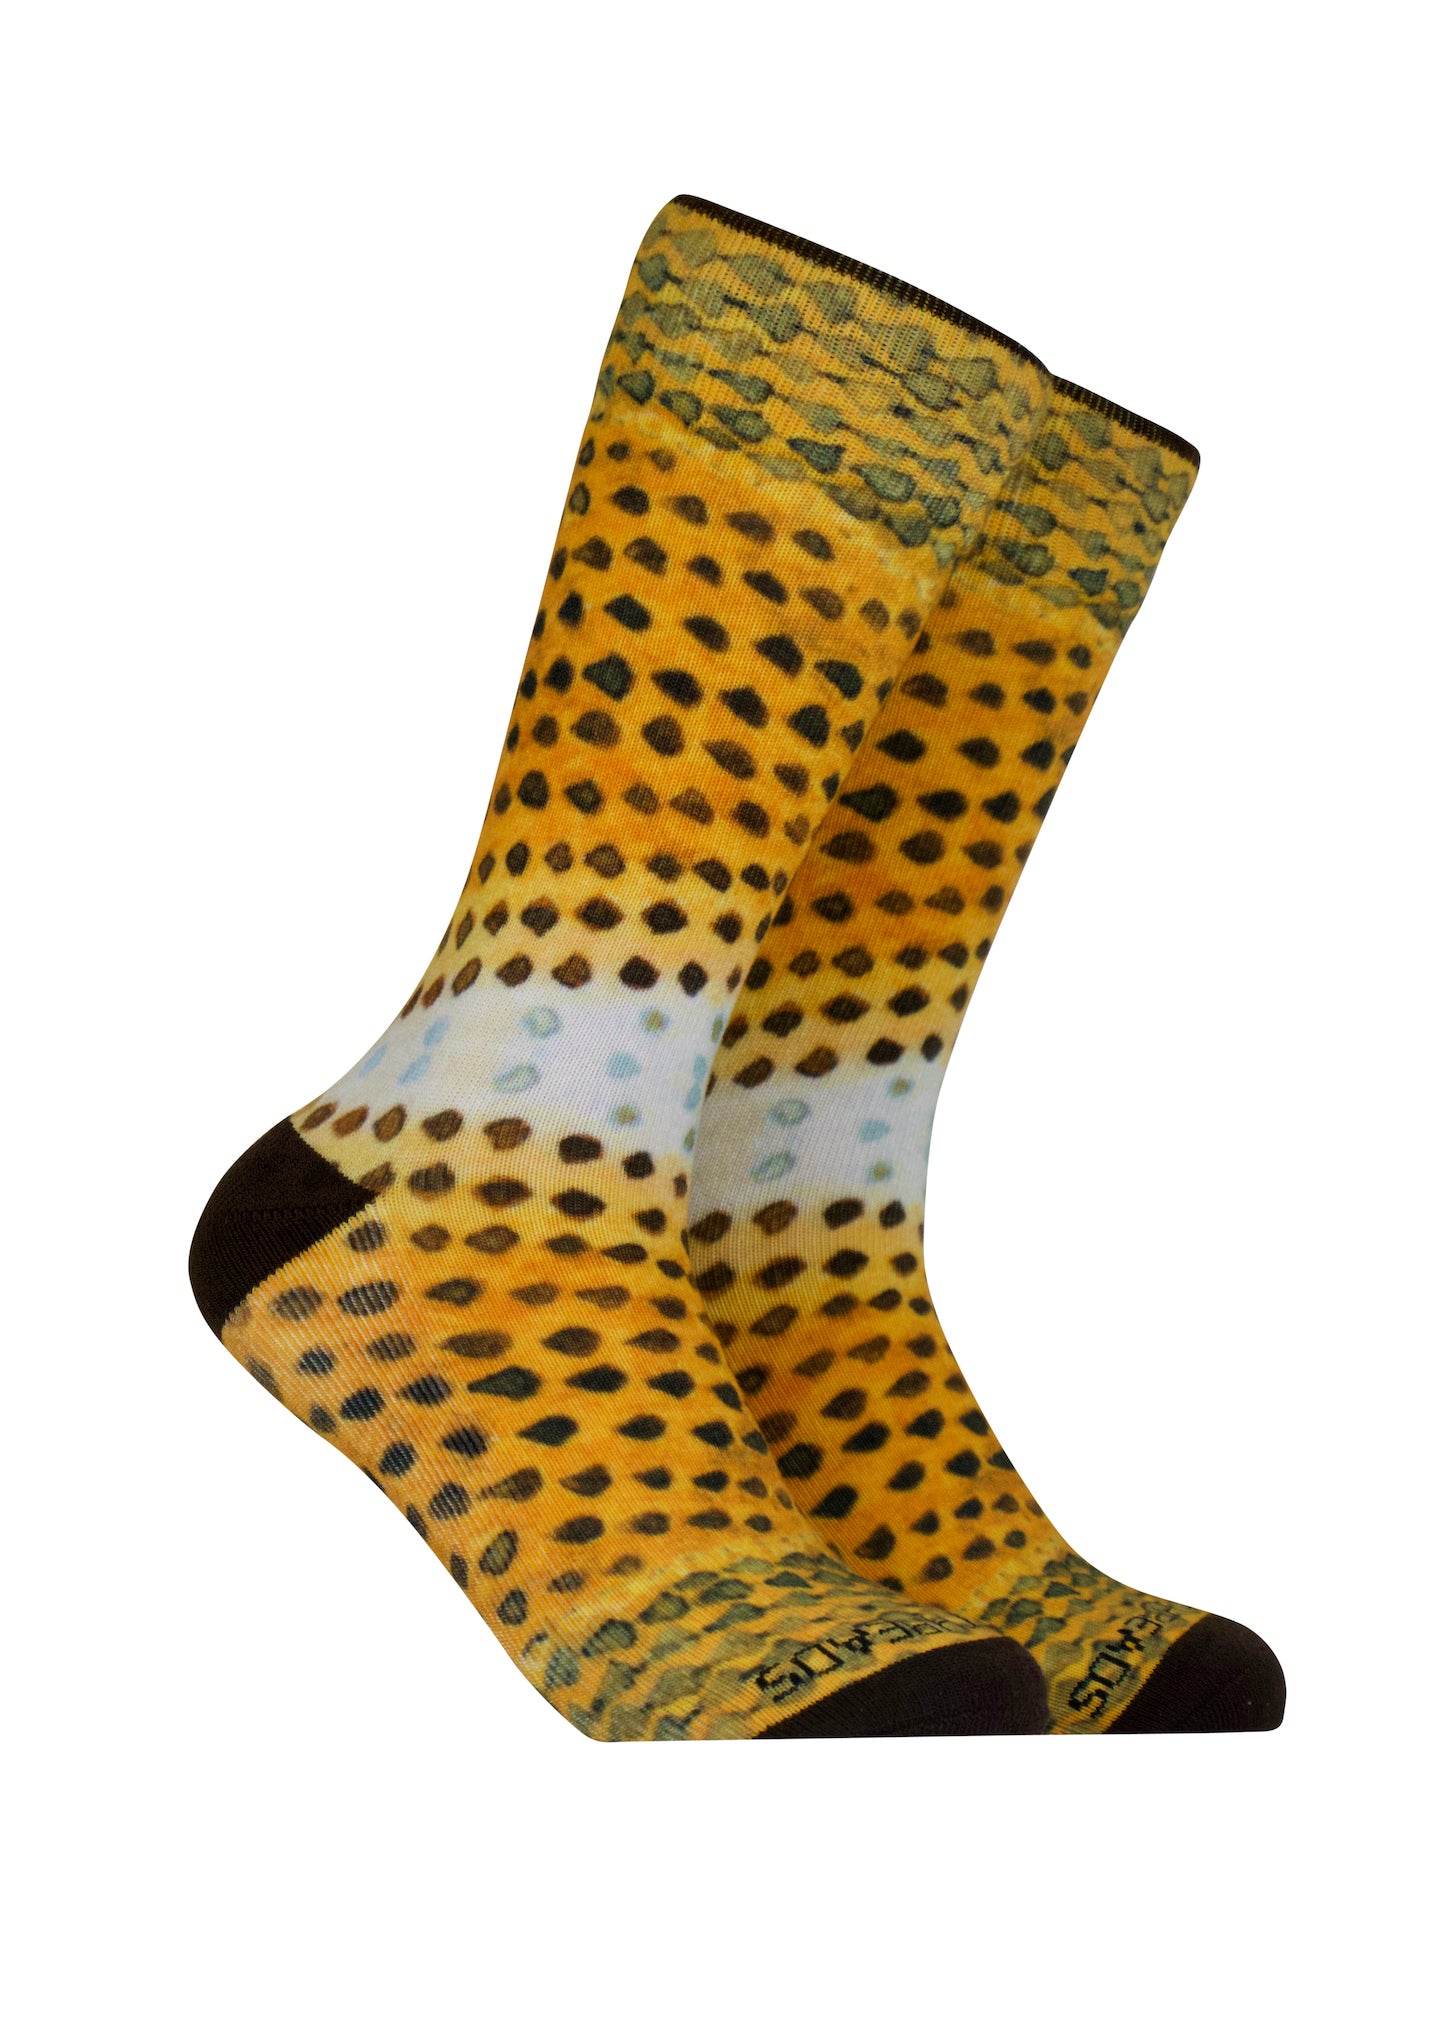 Red Drum Socks - Fish Patterned Clothing- Gifts for Fishermen